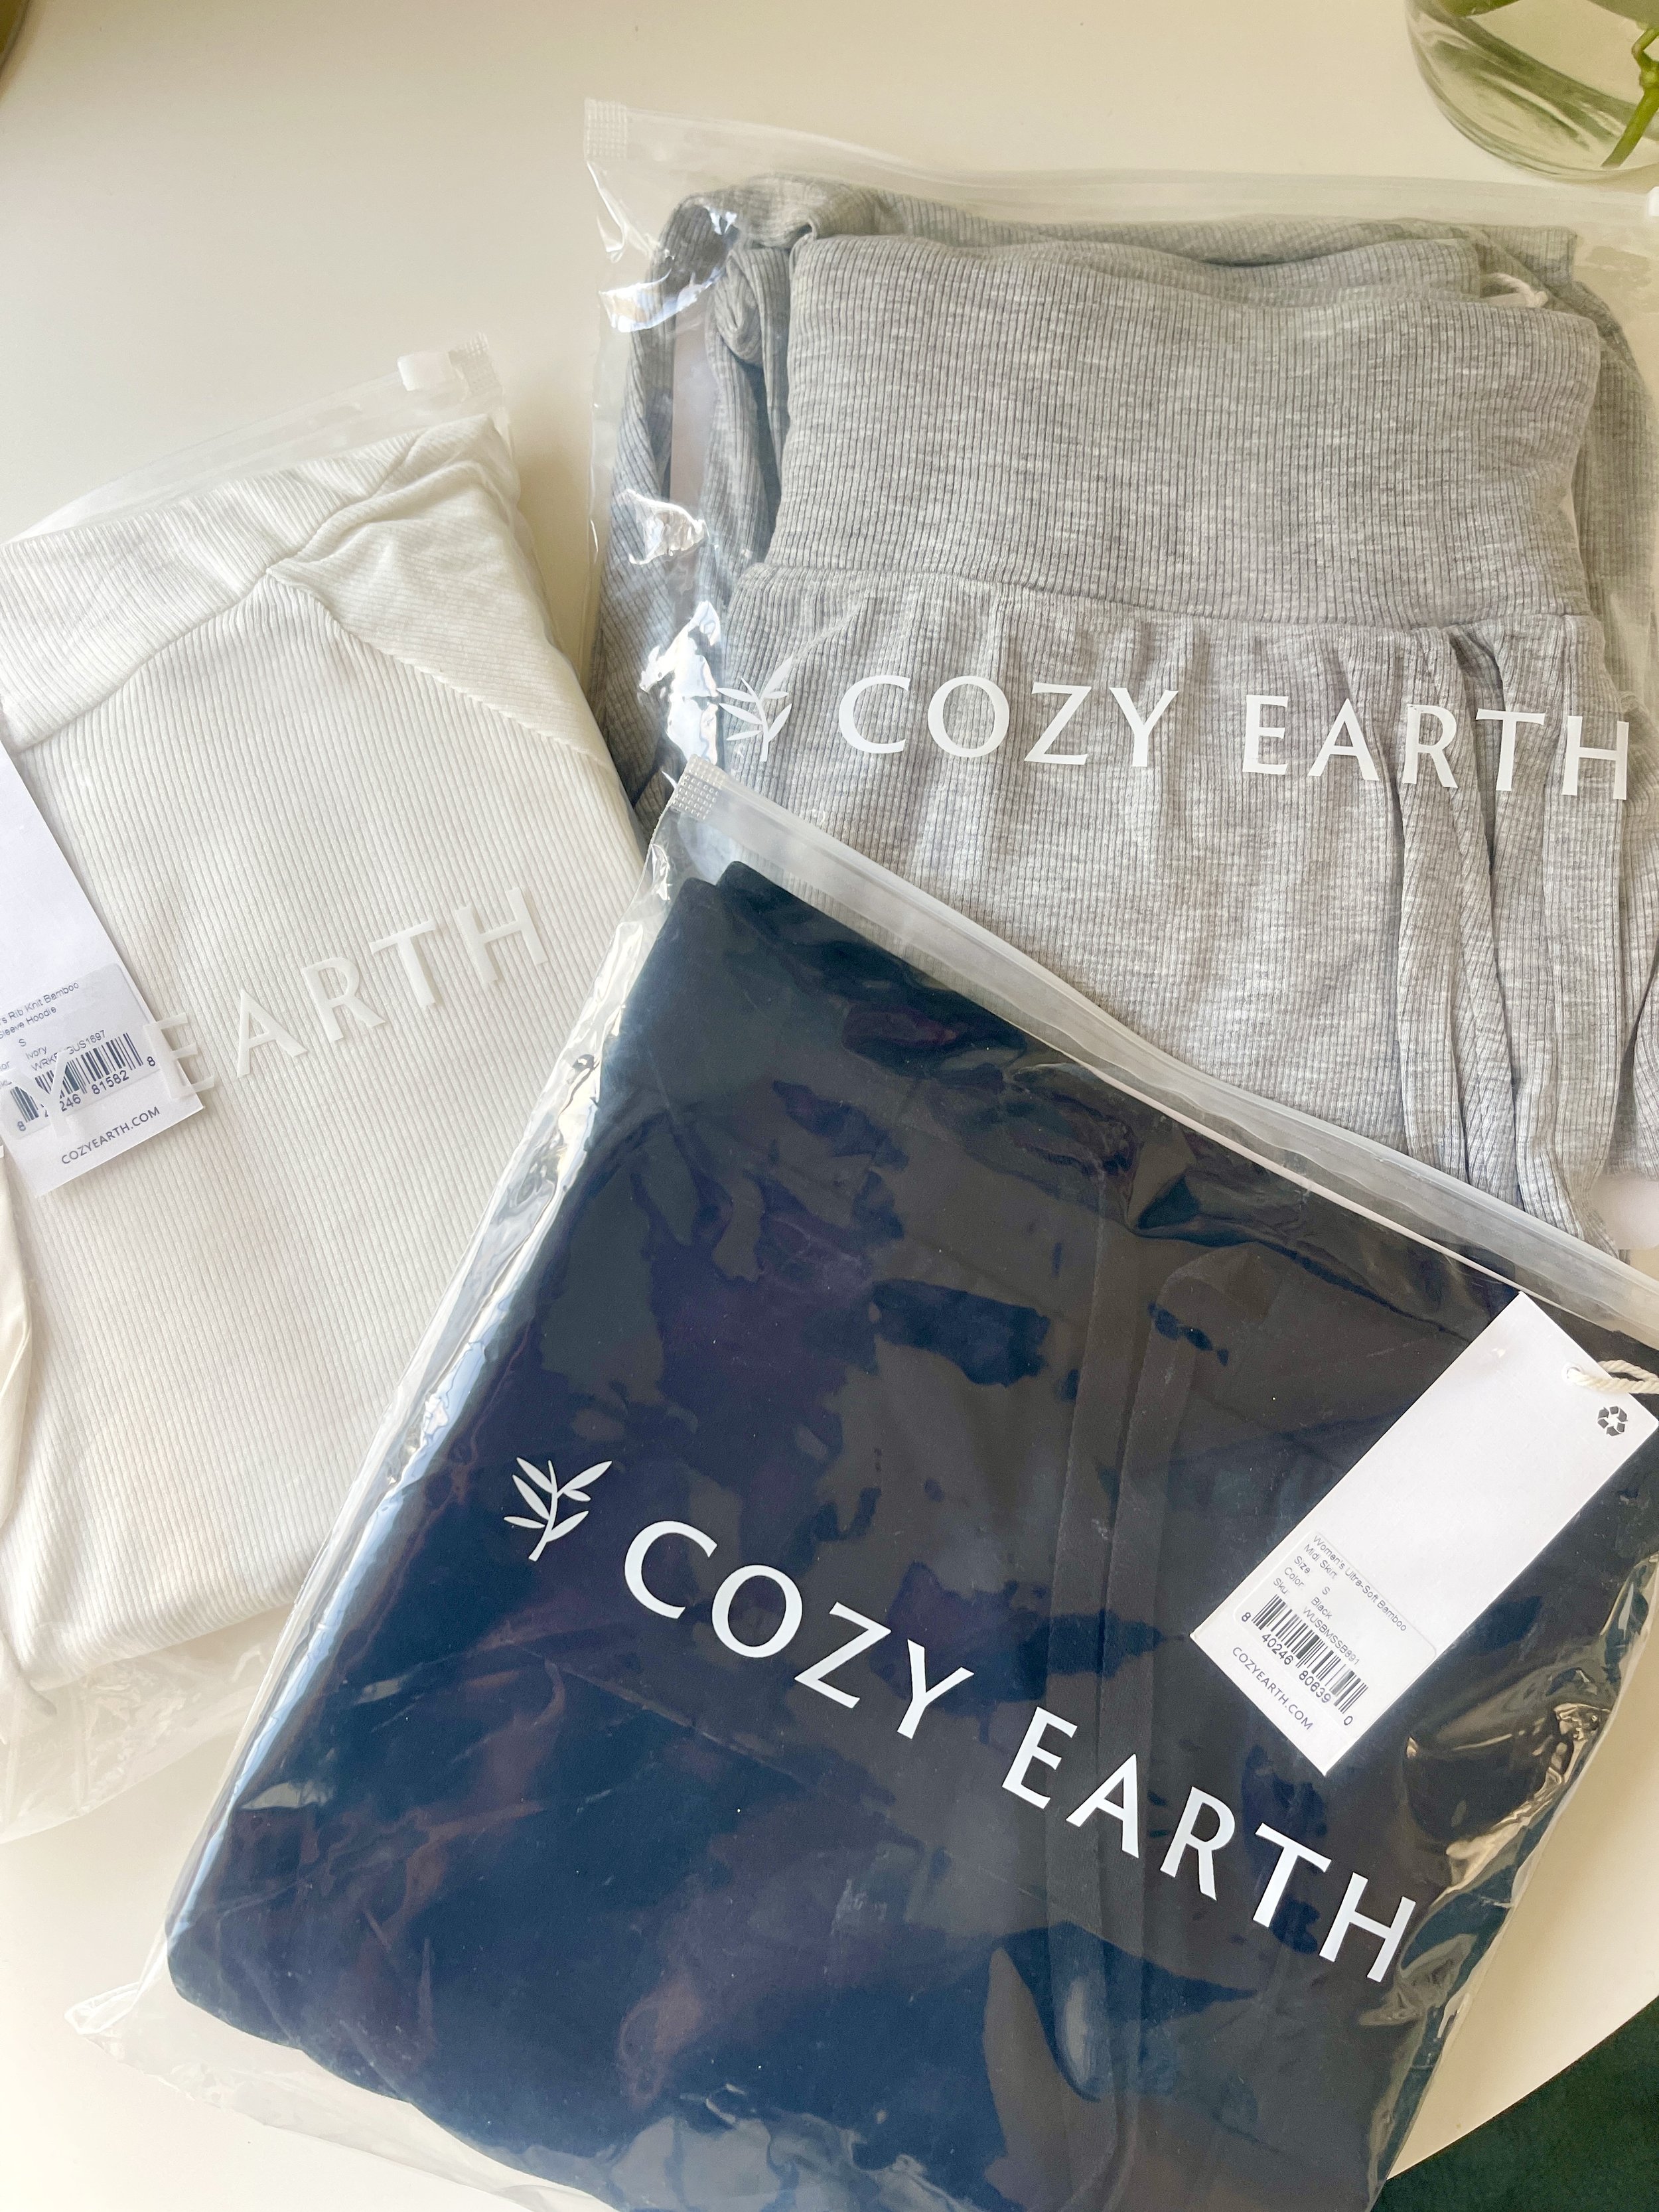 Cozy Earth Clothing Review and Cozy earth clothing sizing review